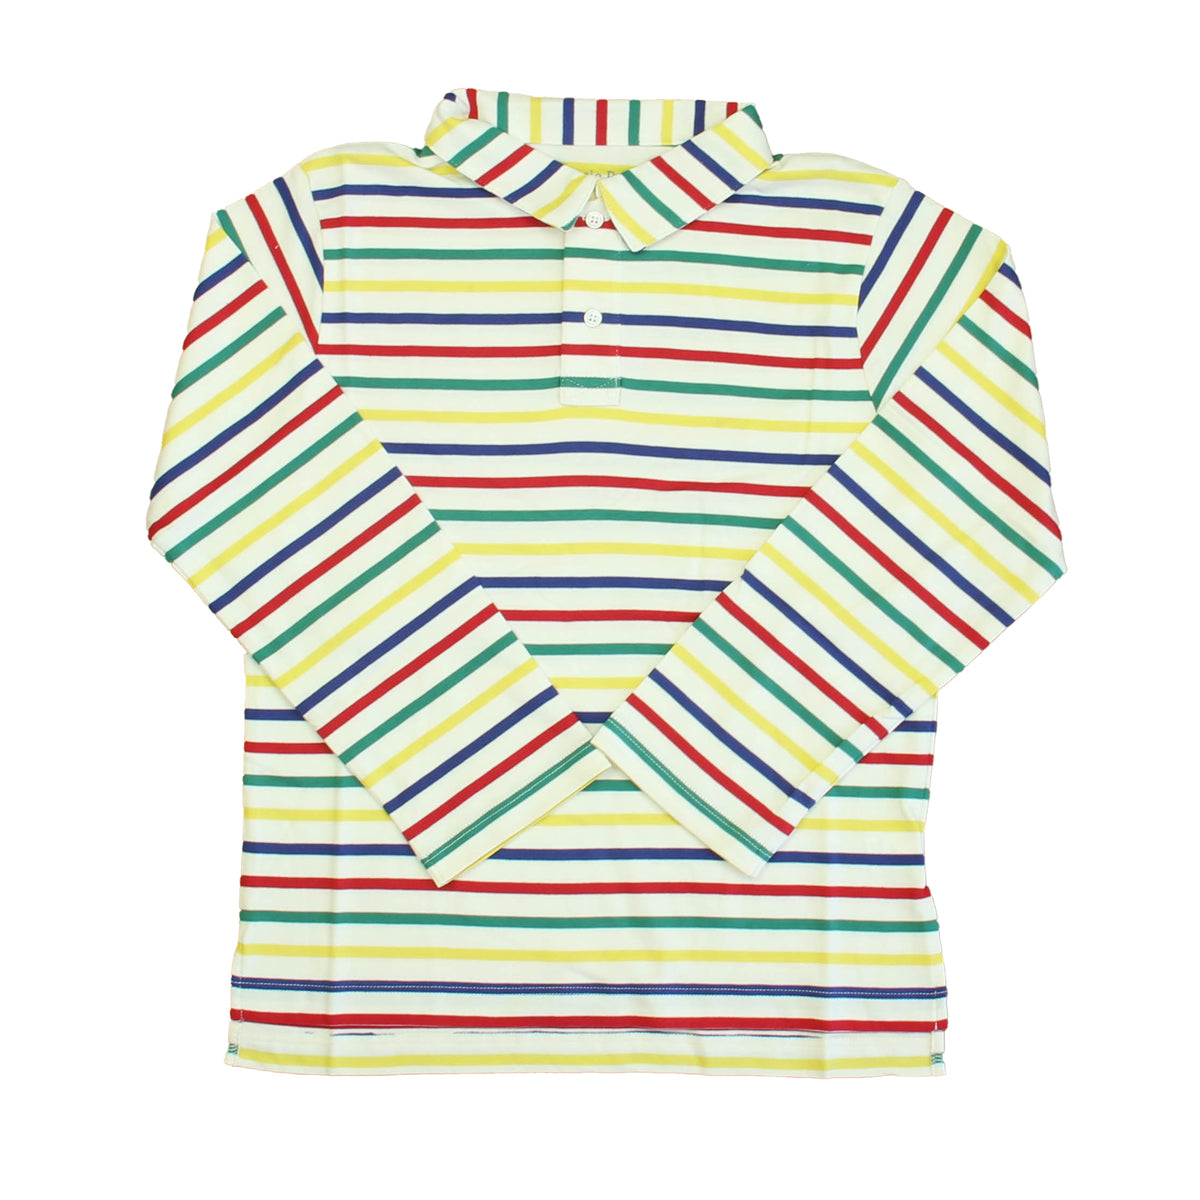 New with Tags: Adirondack Multistripe Top -- FINAL SALE